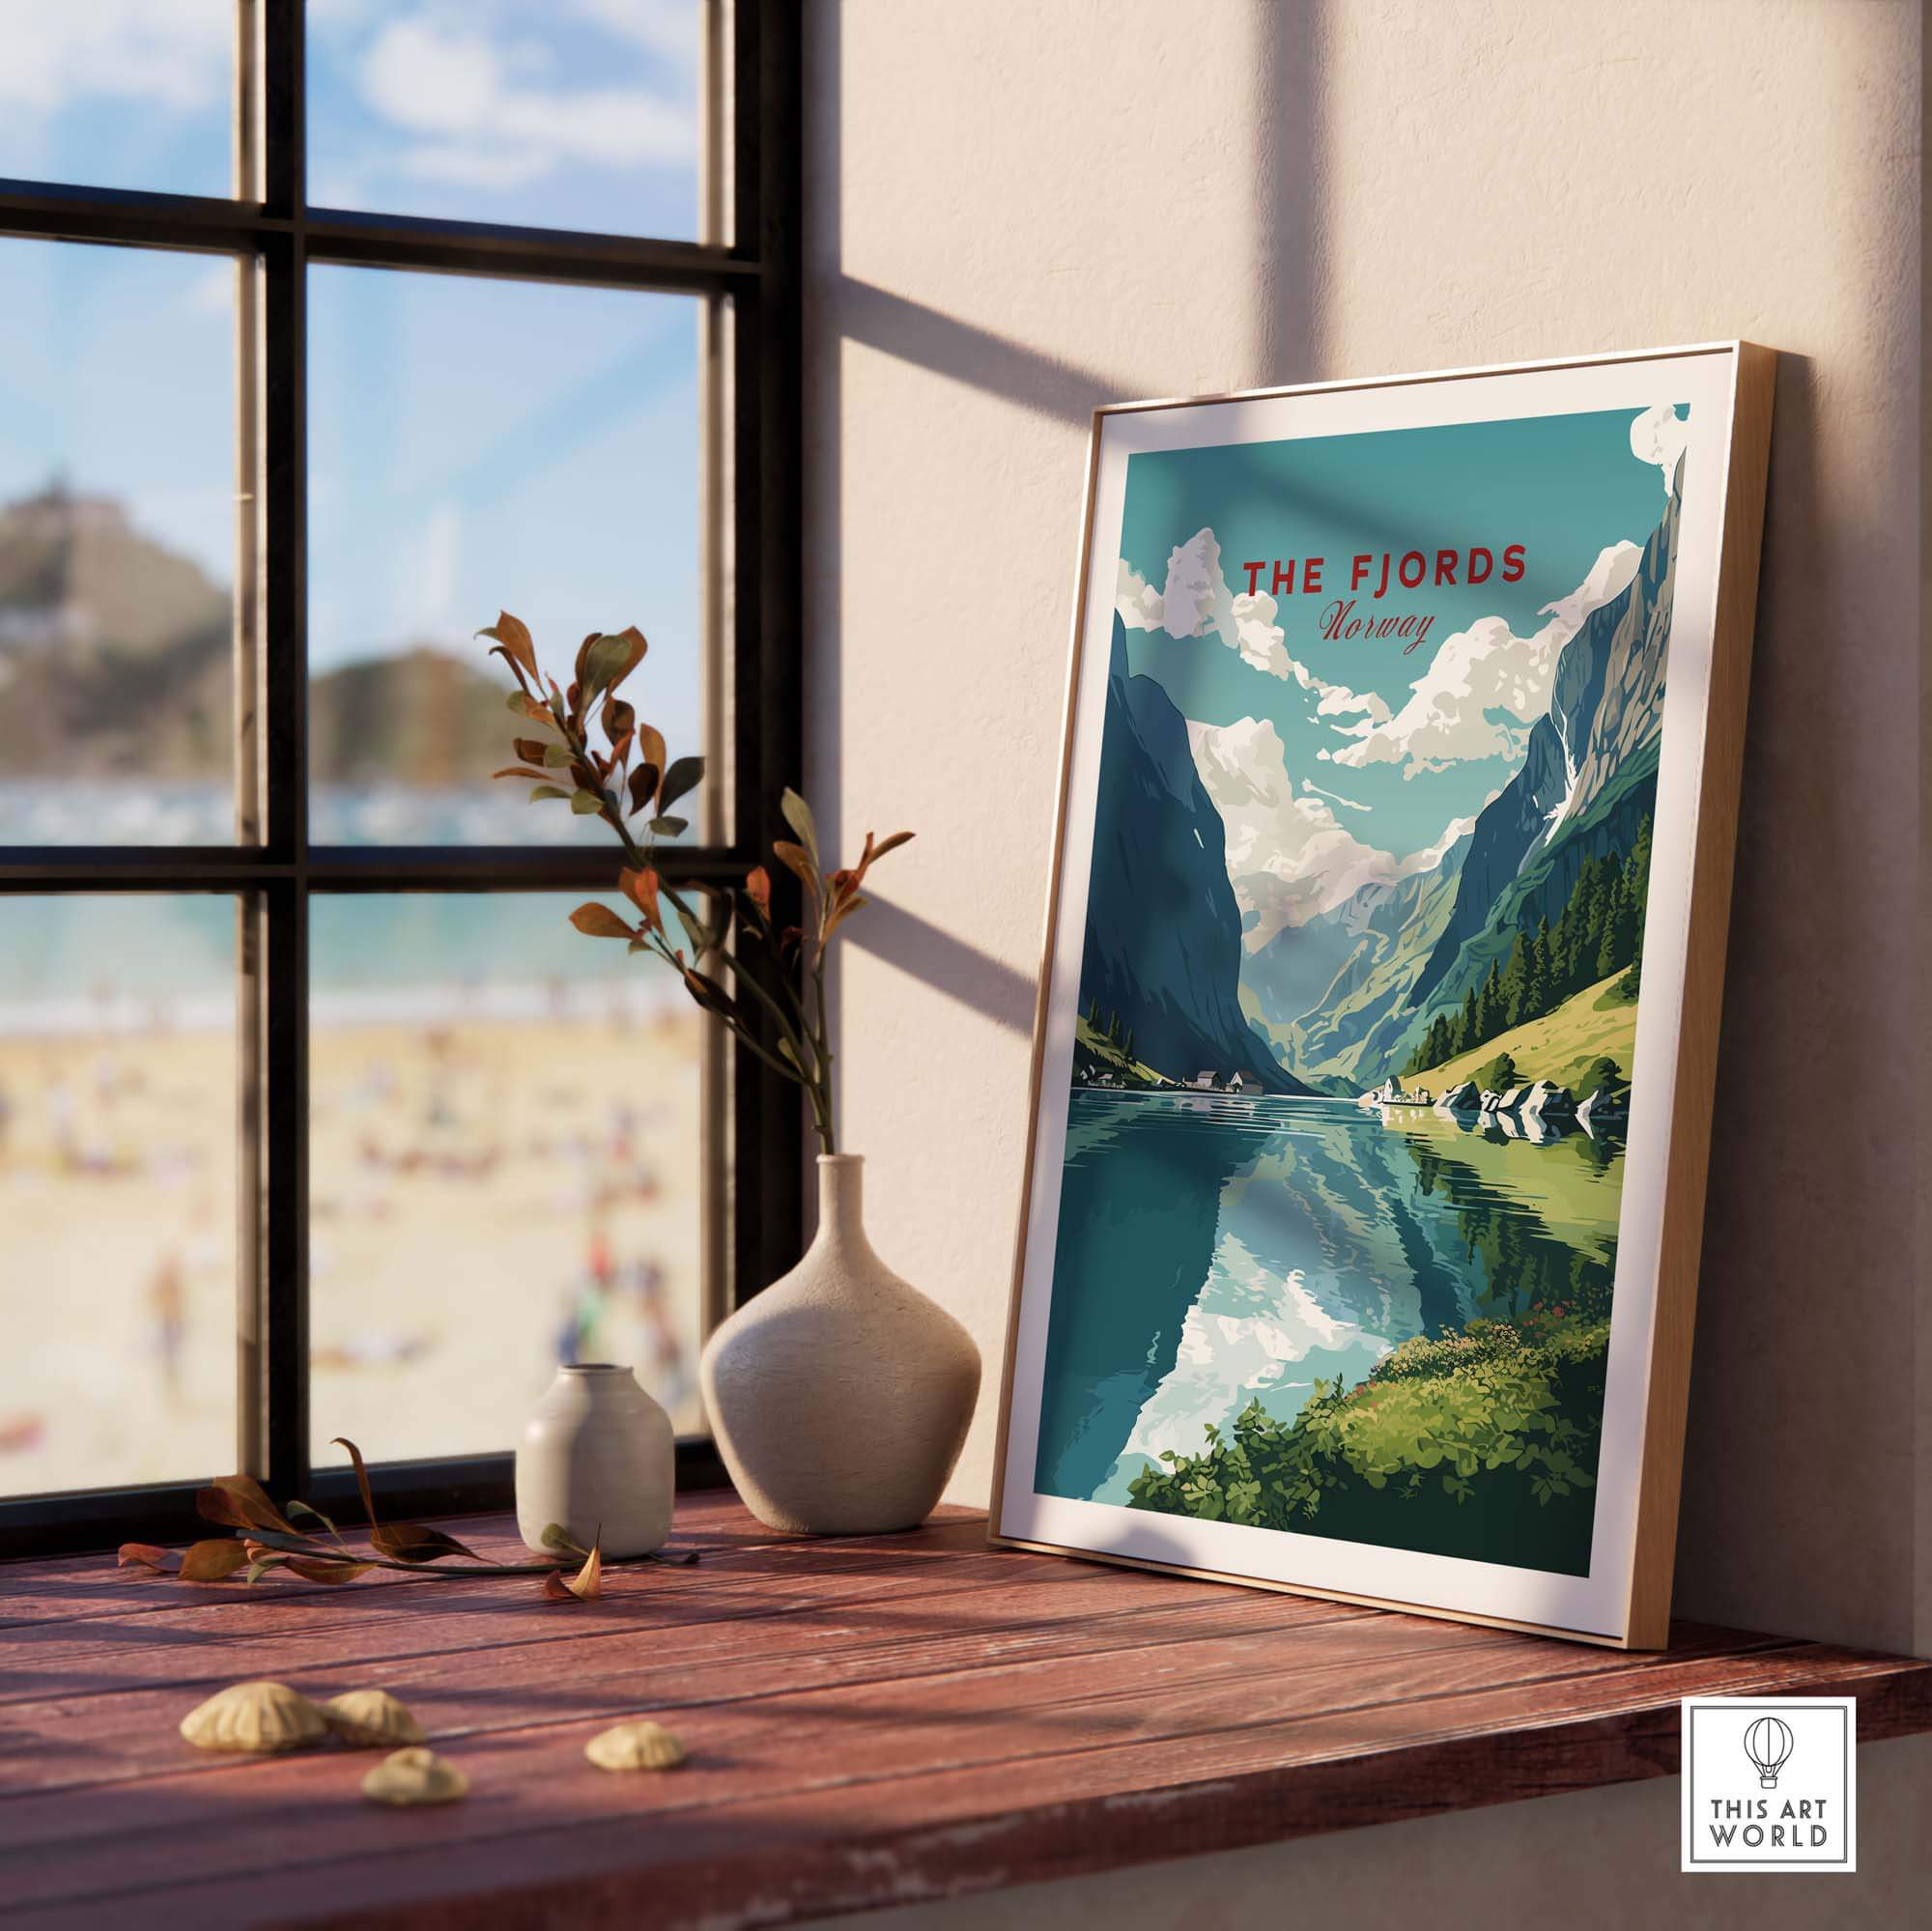 The Fjords in Norway depicted in this framed travel poster shown framed in Natural wood frame and resting in a windowsill in the sunlight.